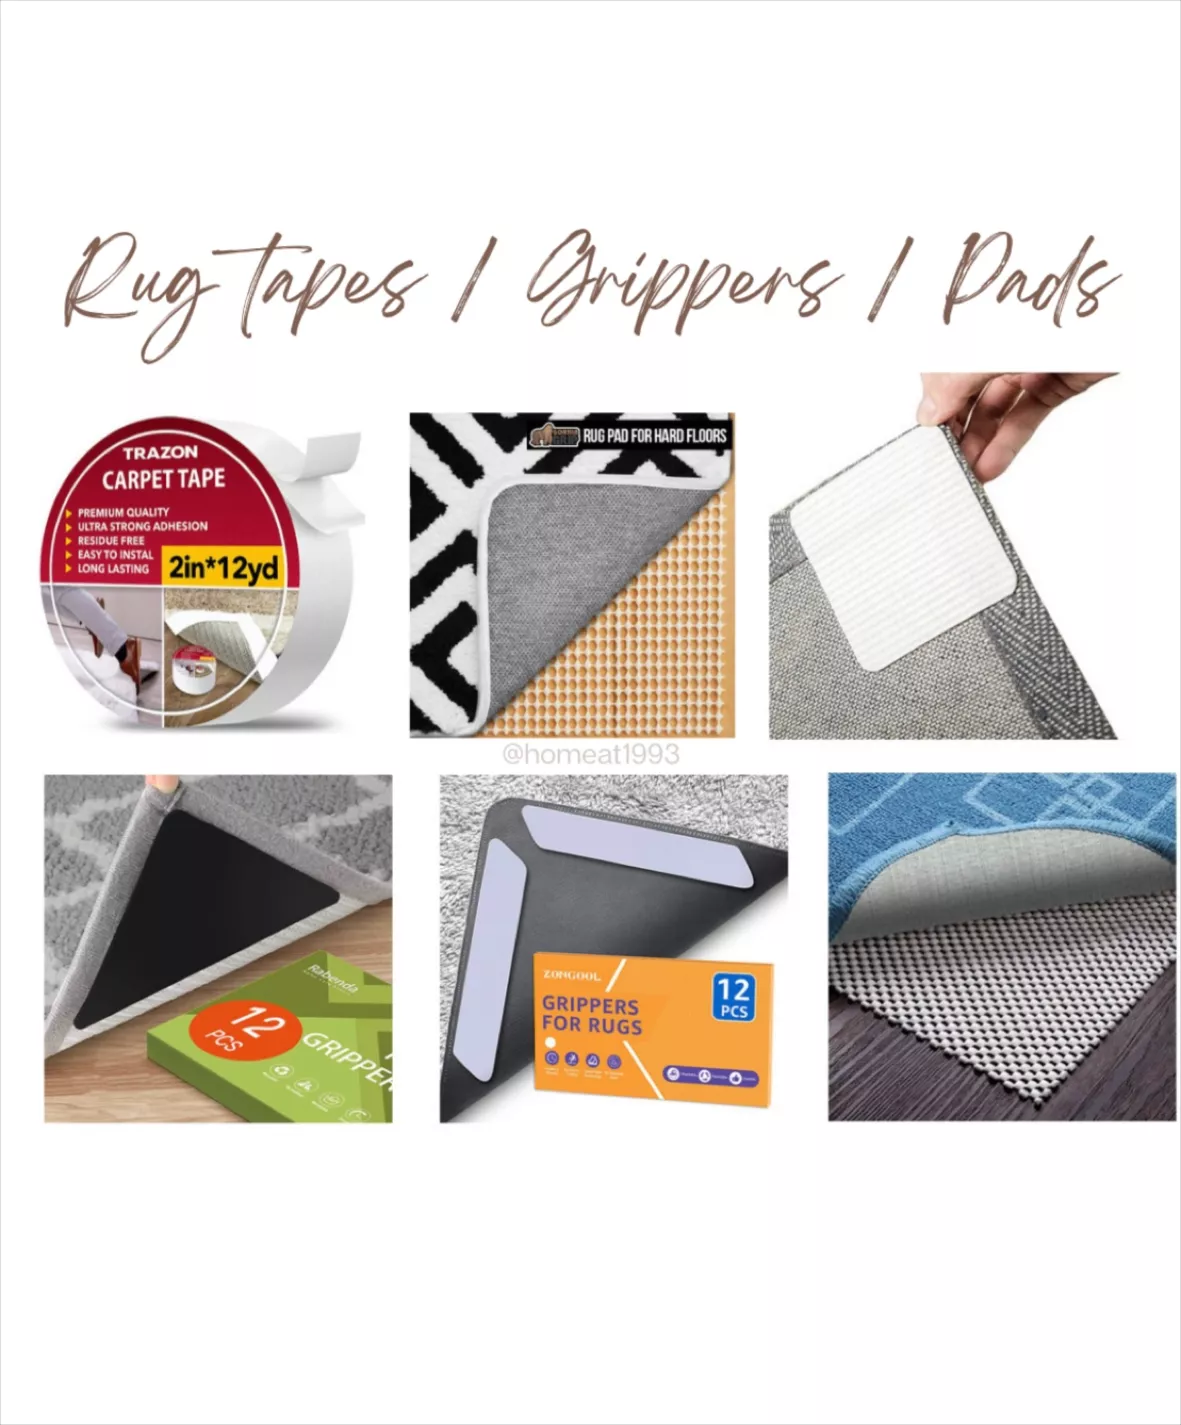 Rug Carpet Non Slip Grippers for Floors, Reusable and Washable Double Sided  Carpet Tape Pads Removable, Strong Adhesive Grippers for Area Rugs, Keep